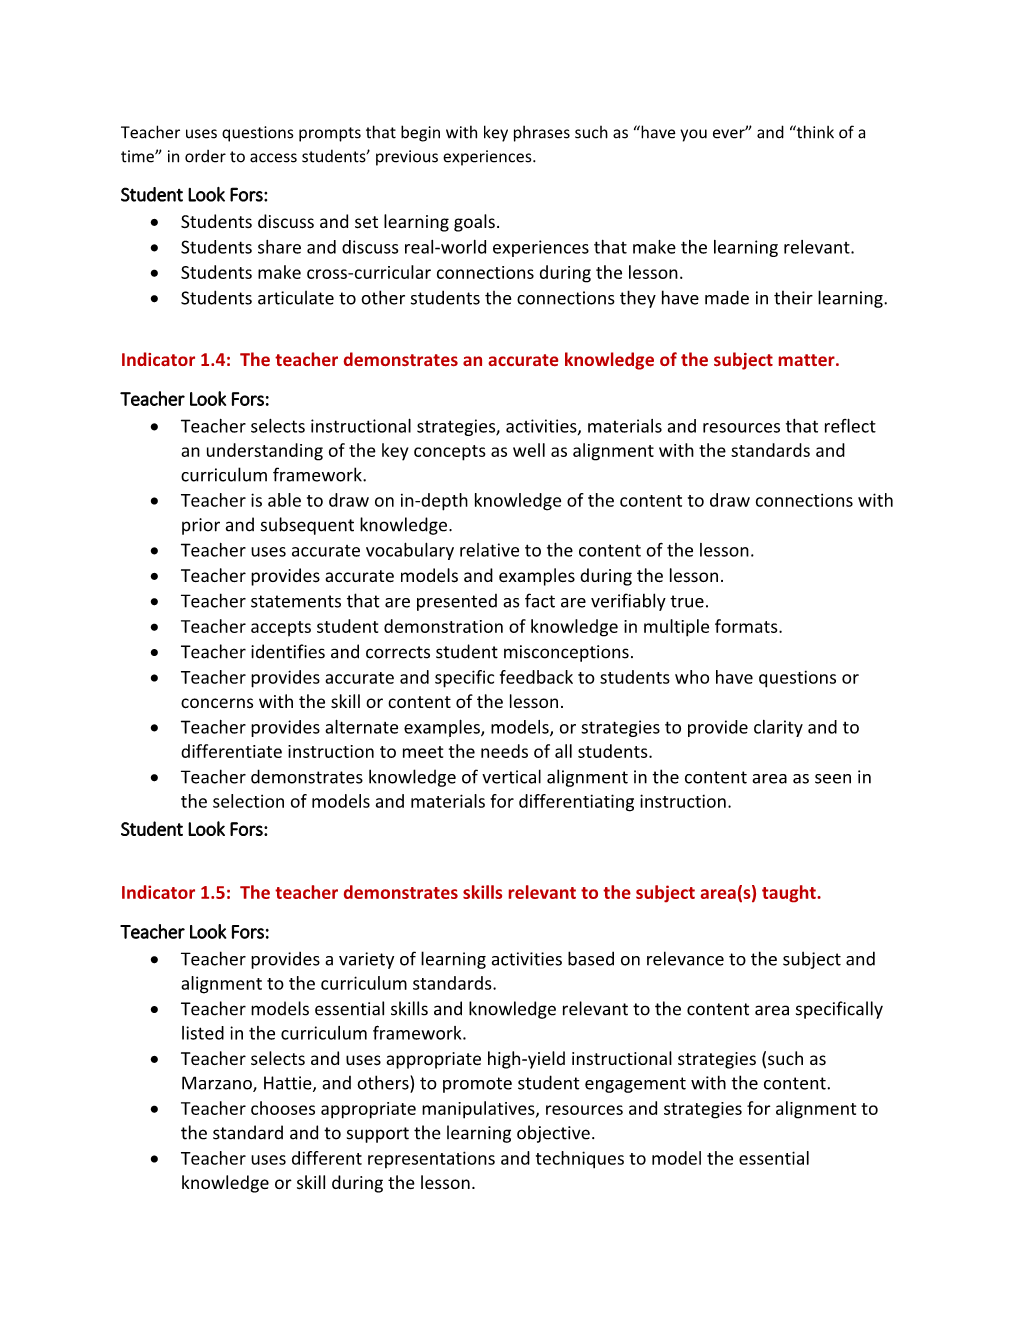 Virginia Department of Education: Aligning Academic Review and Performance Evaluation (AARPE)